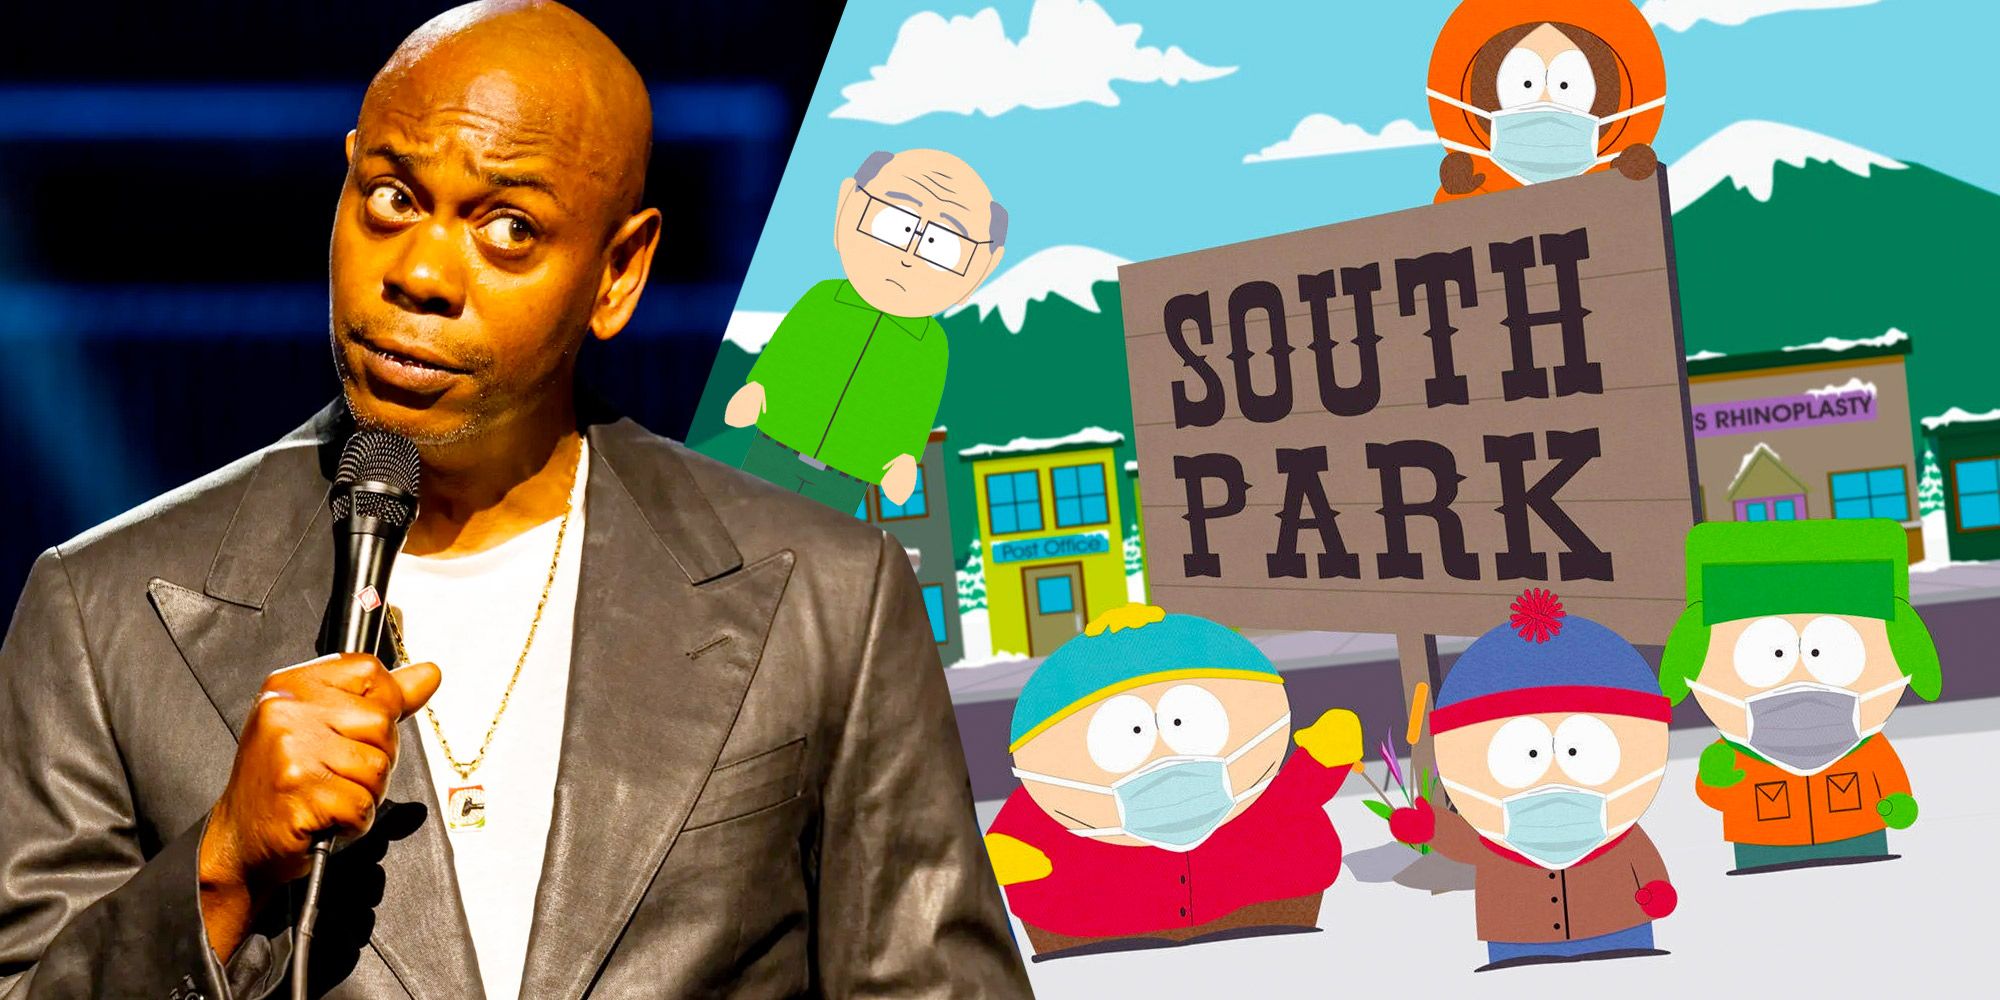 South Park Creator Says Netflix Reputation Went Up Due To Chappelle Response